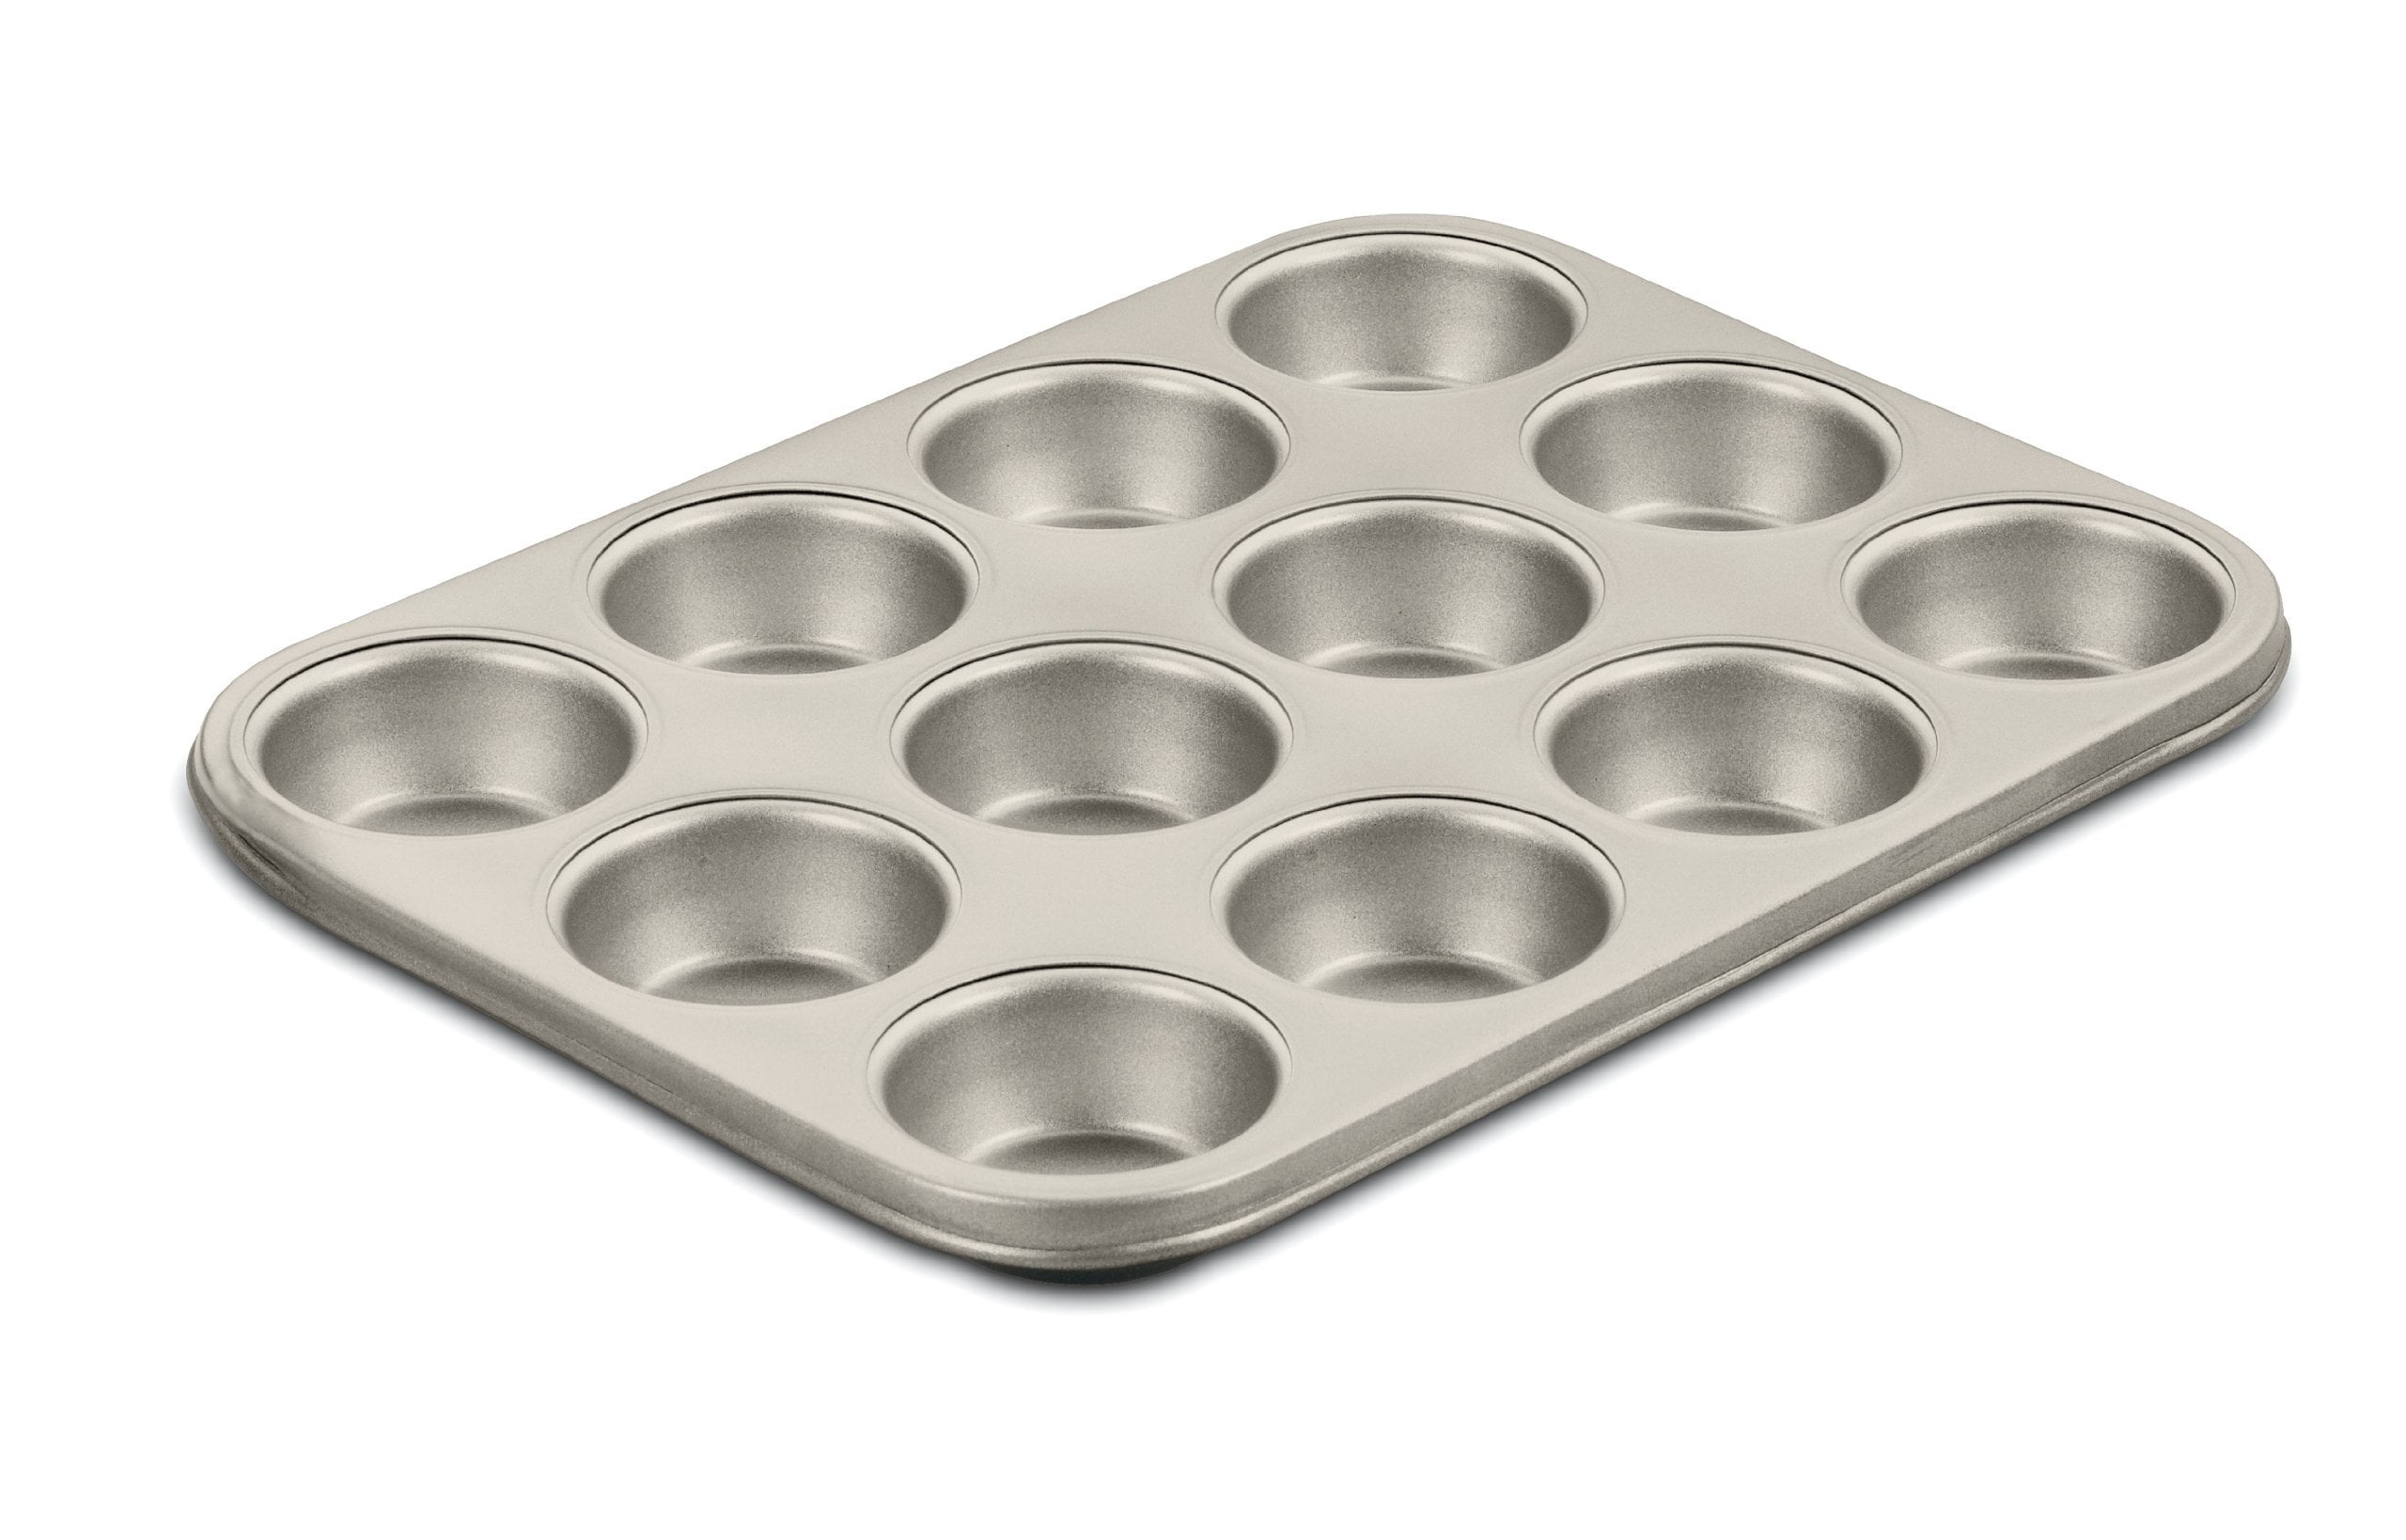 Cuisinart Chef's Classic Nonstick 6 Cup Muffin Top Pan